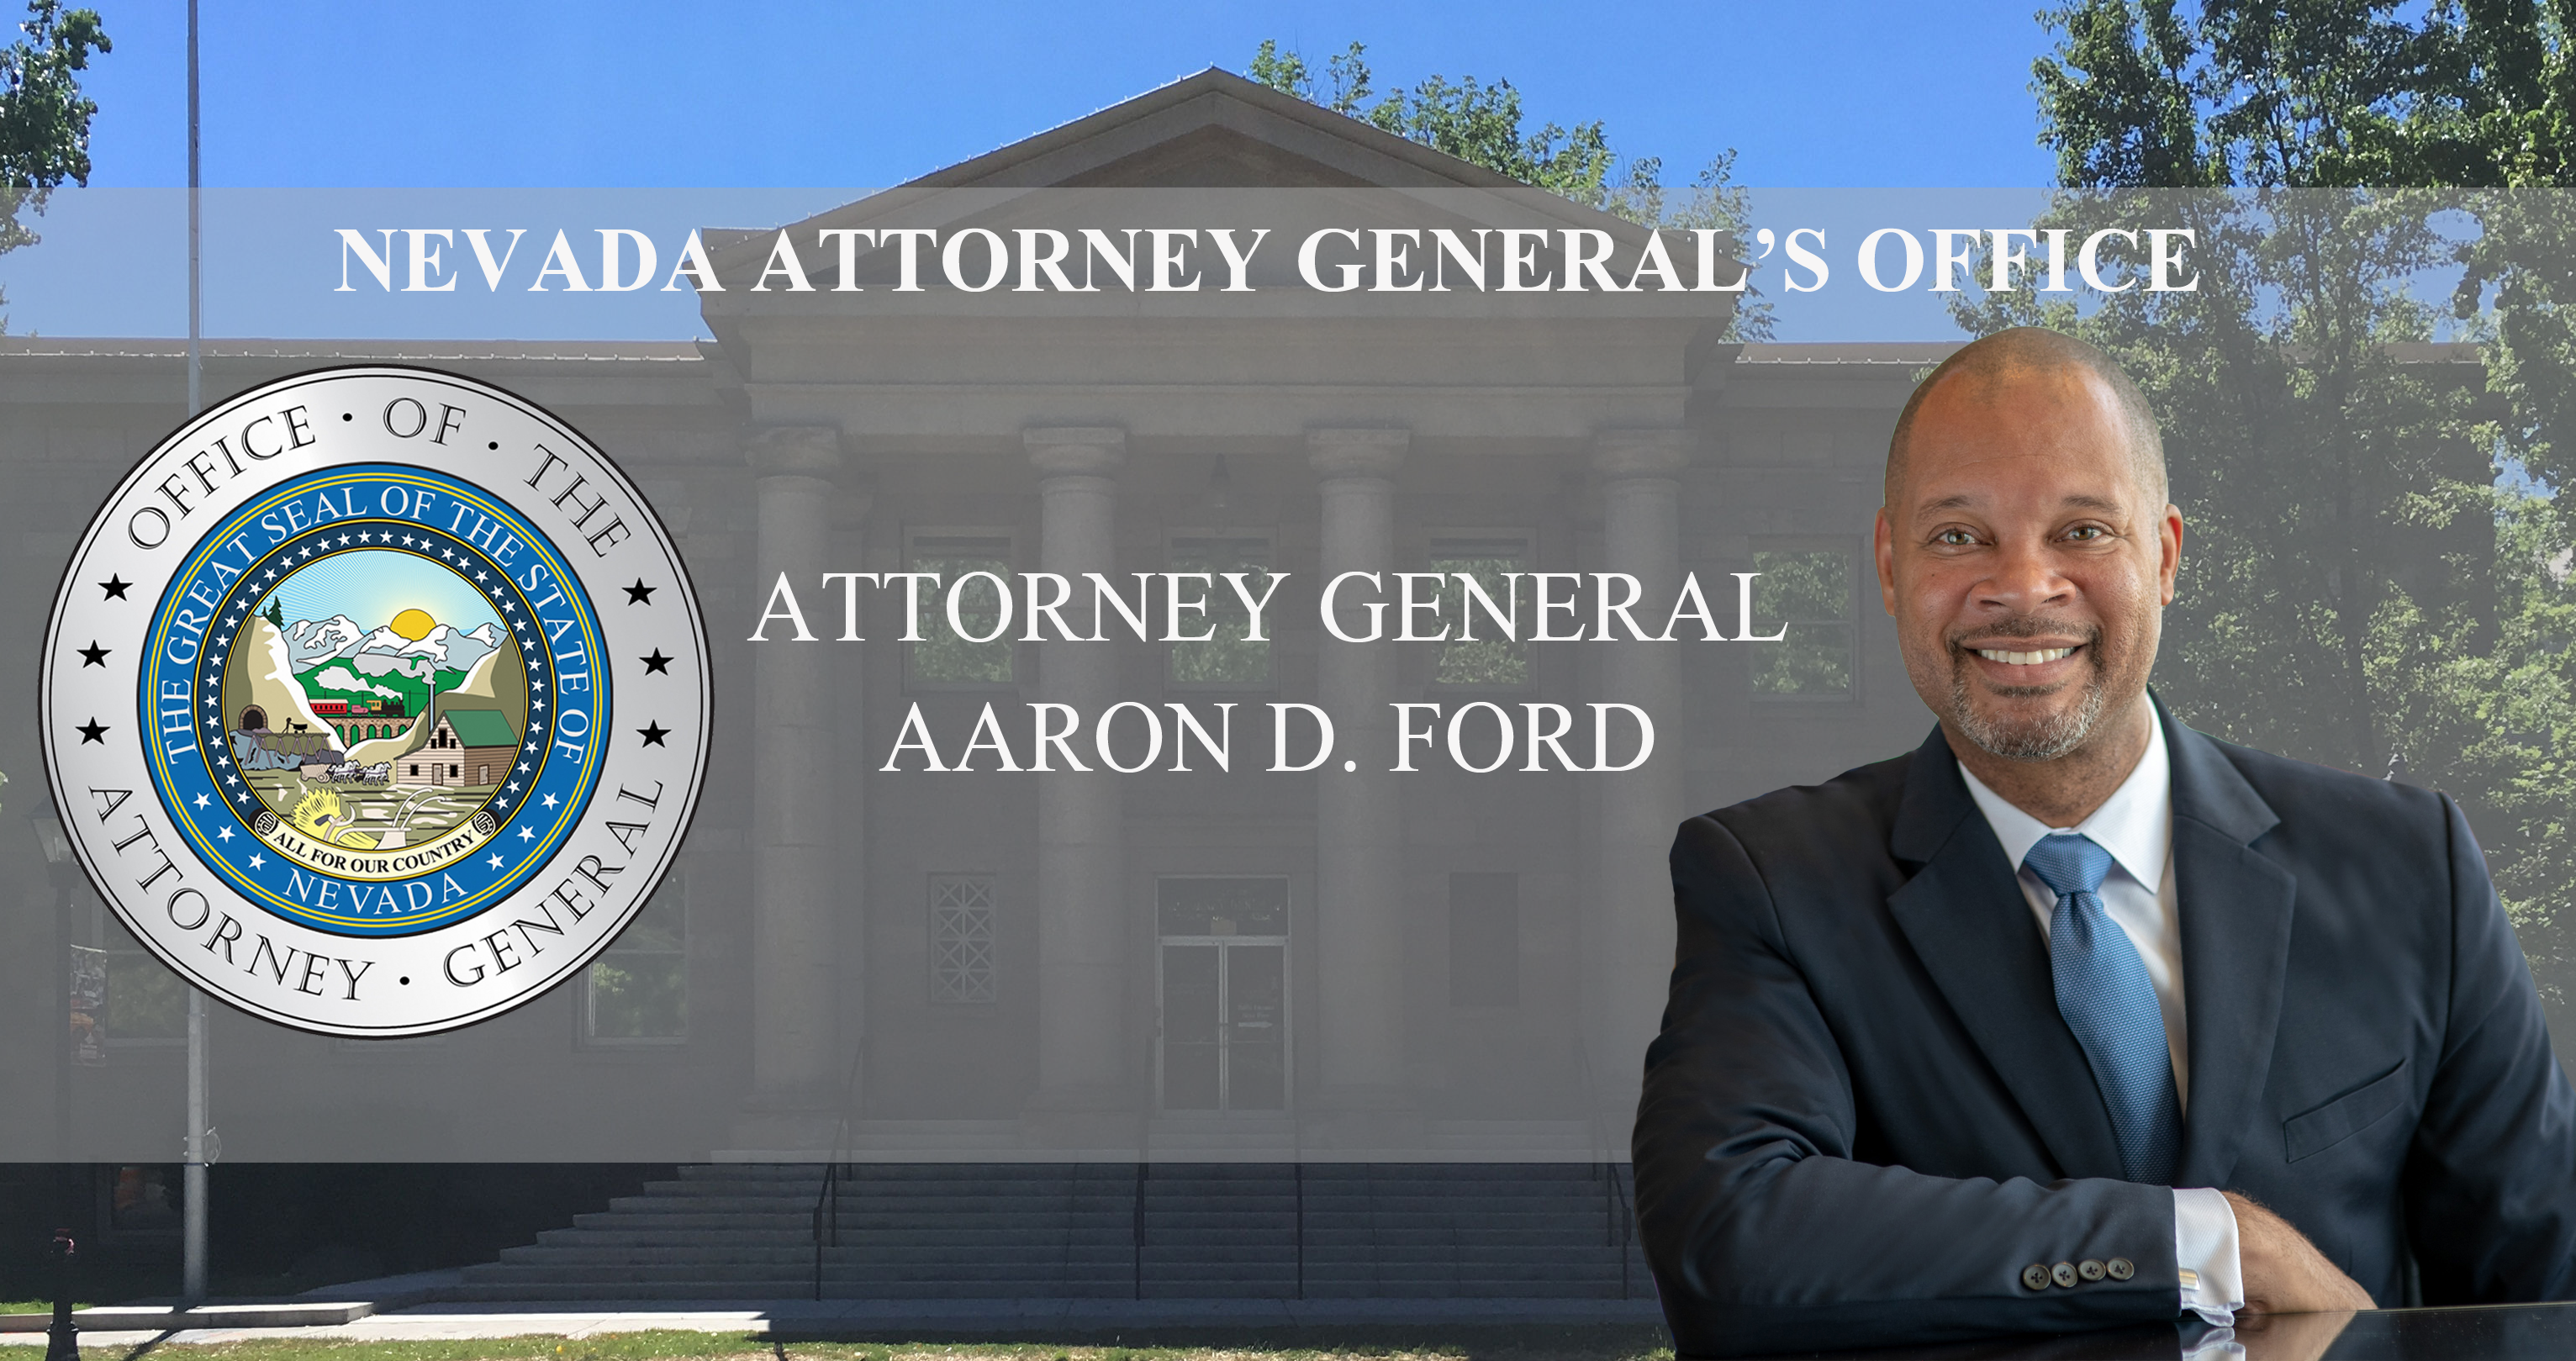 Nevada Attorney General Aaron D. Ford banner image